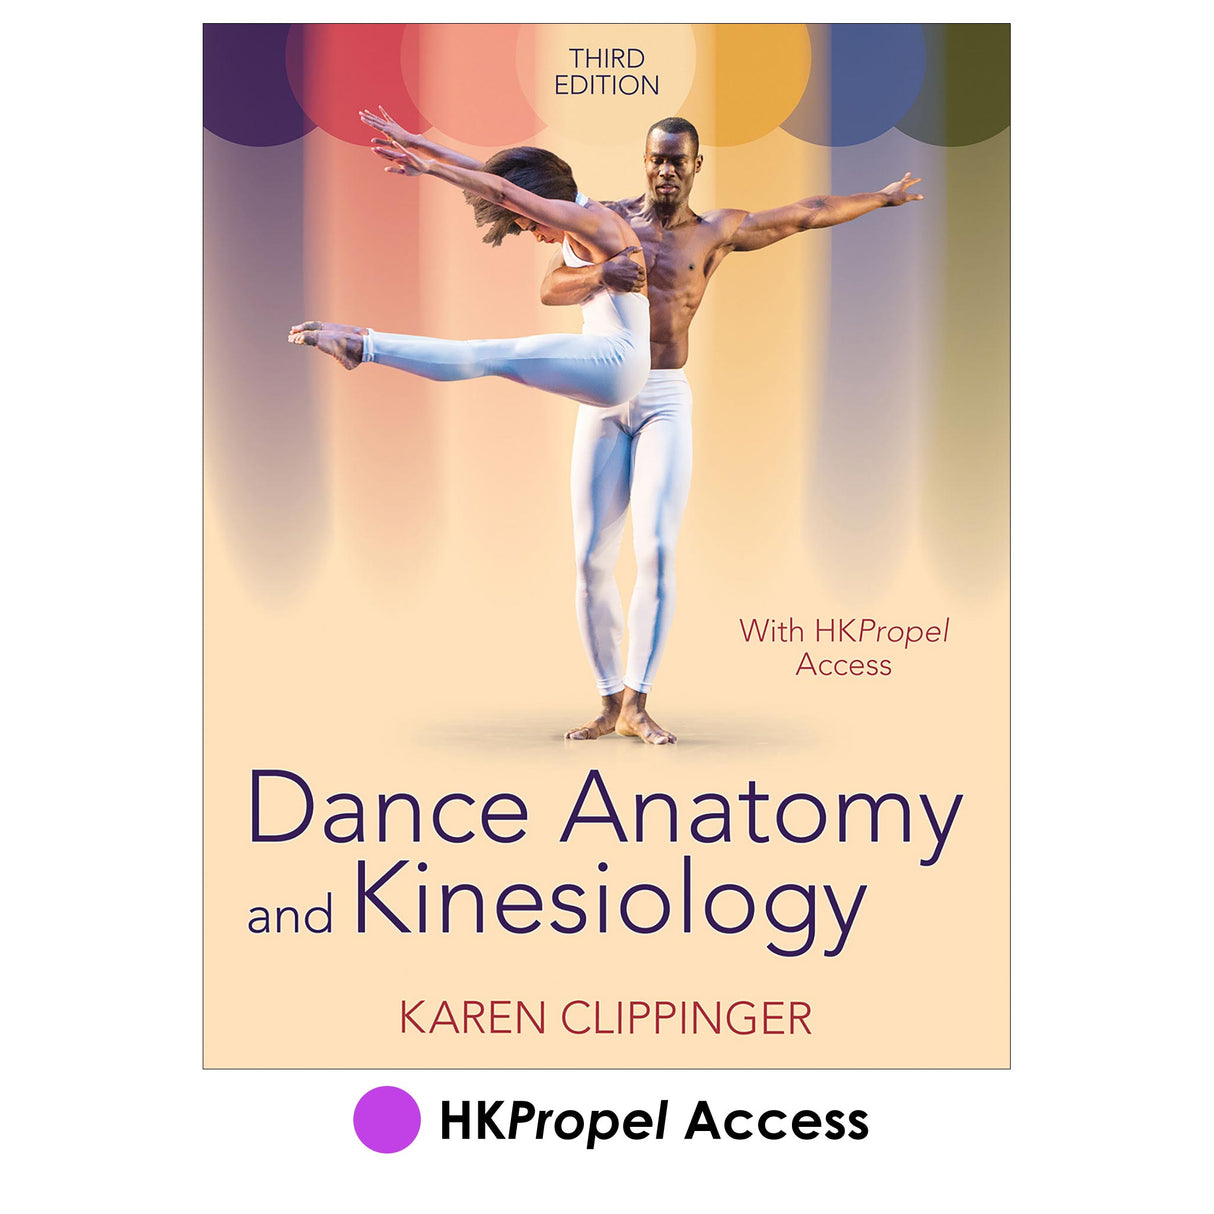 Dance Anatomy and Kinesiology 3rd Edition HKPropel Access